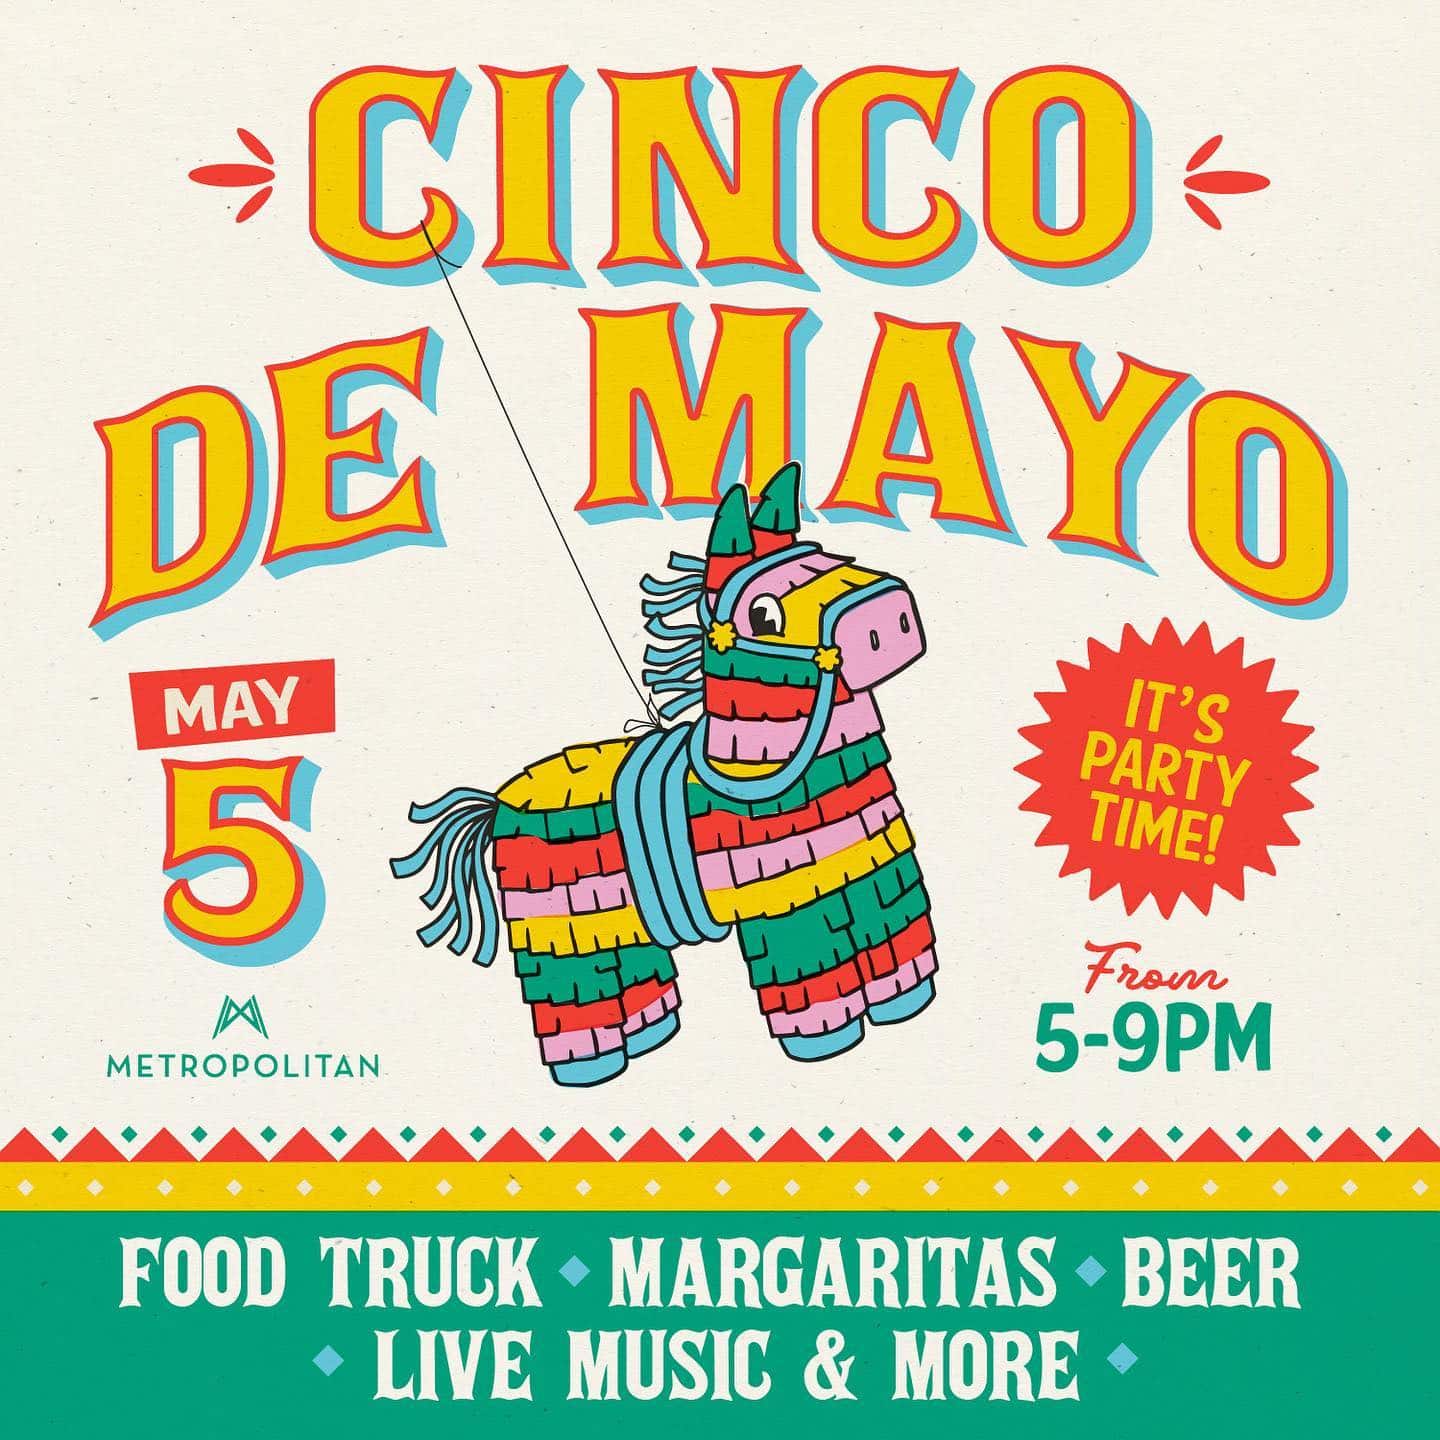 Mark your calendars! Join us as we celebrate Cinco De Mayo next Thursday, May 5th. ⁣
⁣
Cinco De Mayo Festivities: ⁣
? Live Music ⁣
? Food Truck @itoftacos⁣
? Margarita’s @dresslersrestaurant⁣
? Beer @sycamorebrewing⁣
? Braid Bar @modernsalonandspa⁣
? Face Painting⁣
? Photo-Ops⁣
? And More! ⁣
⁣
Free parking and admission. Visit the link in our bio for more information! ⁣